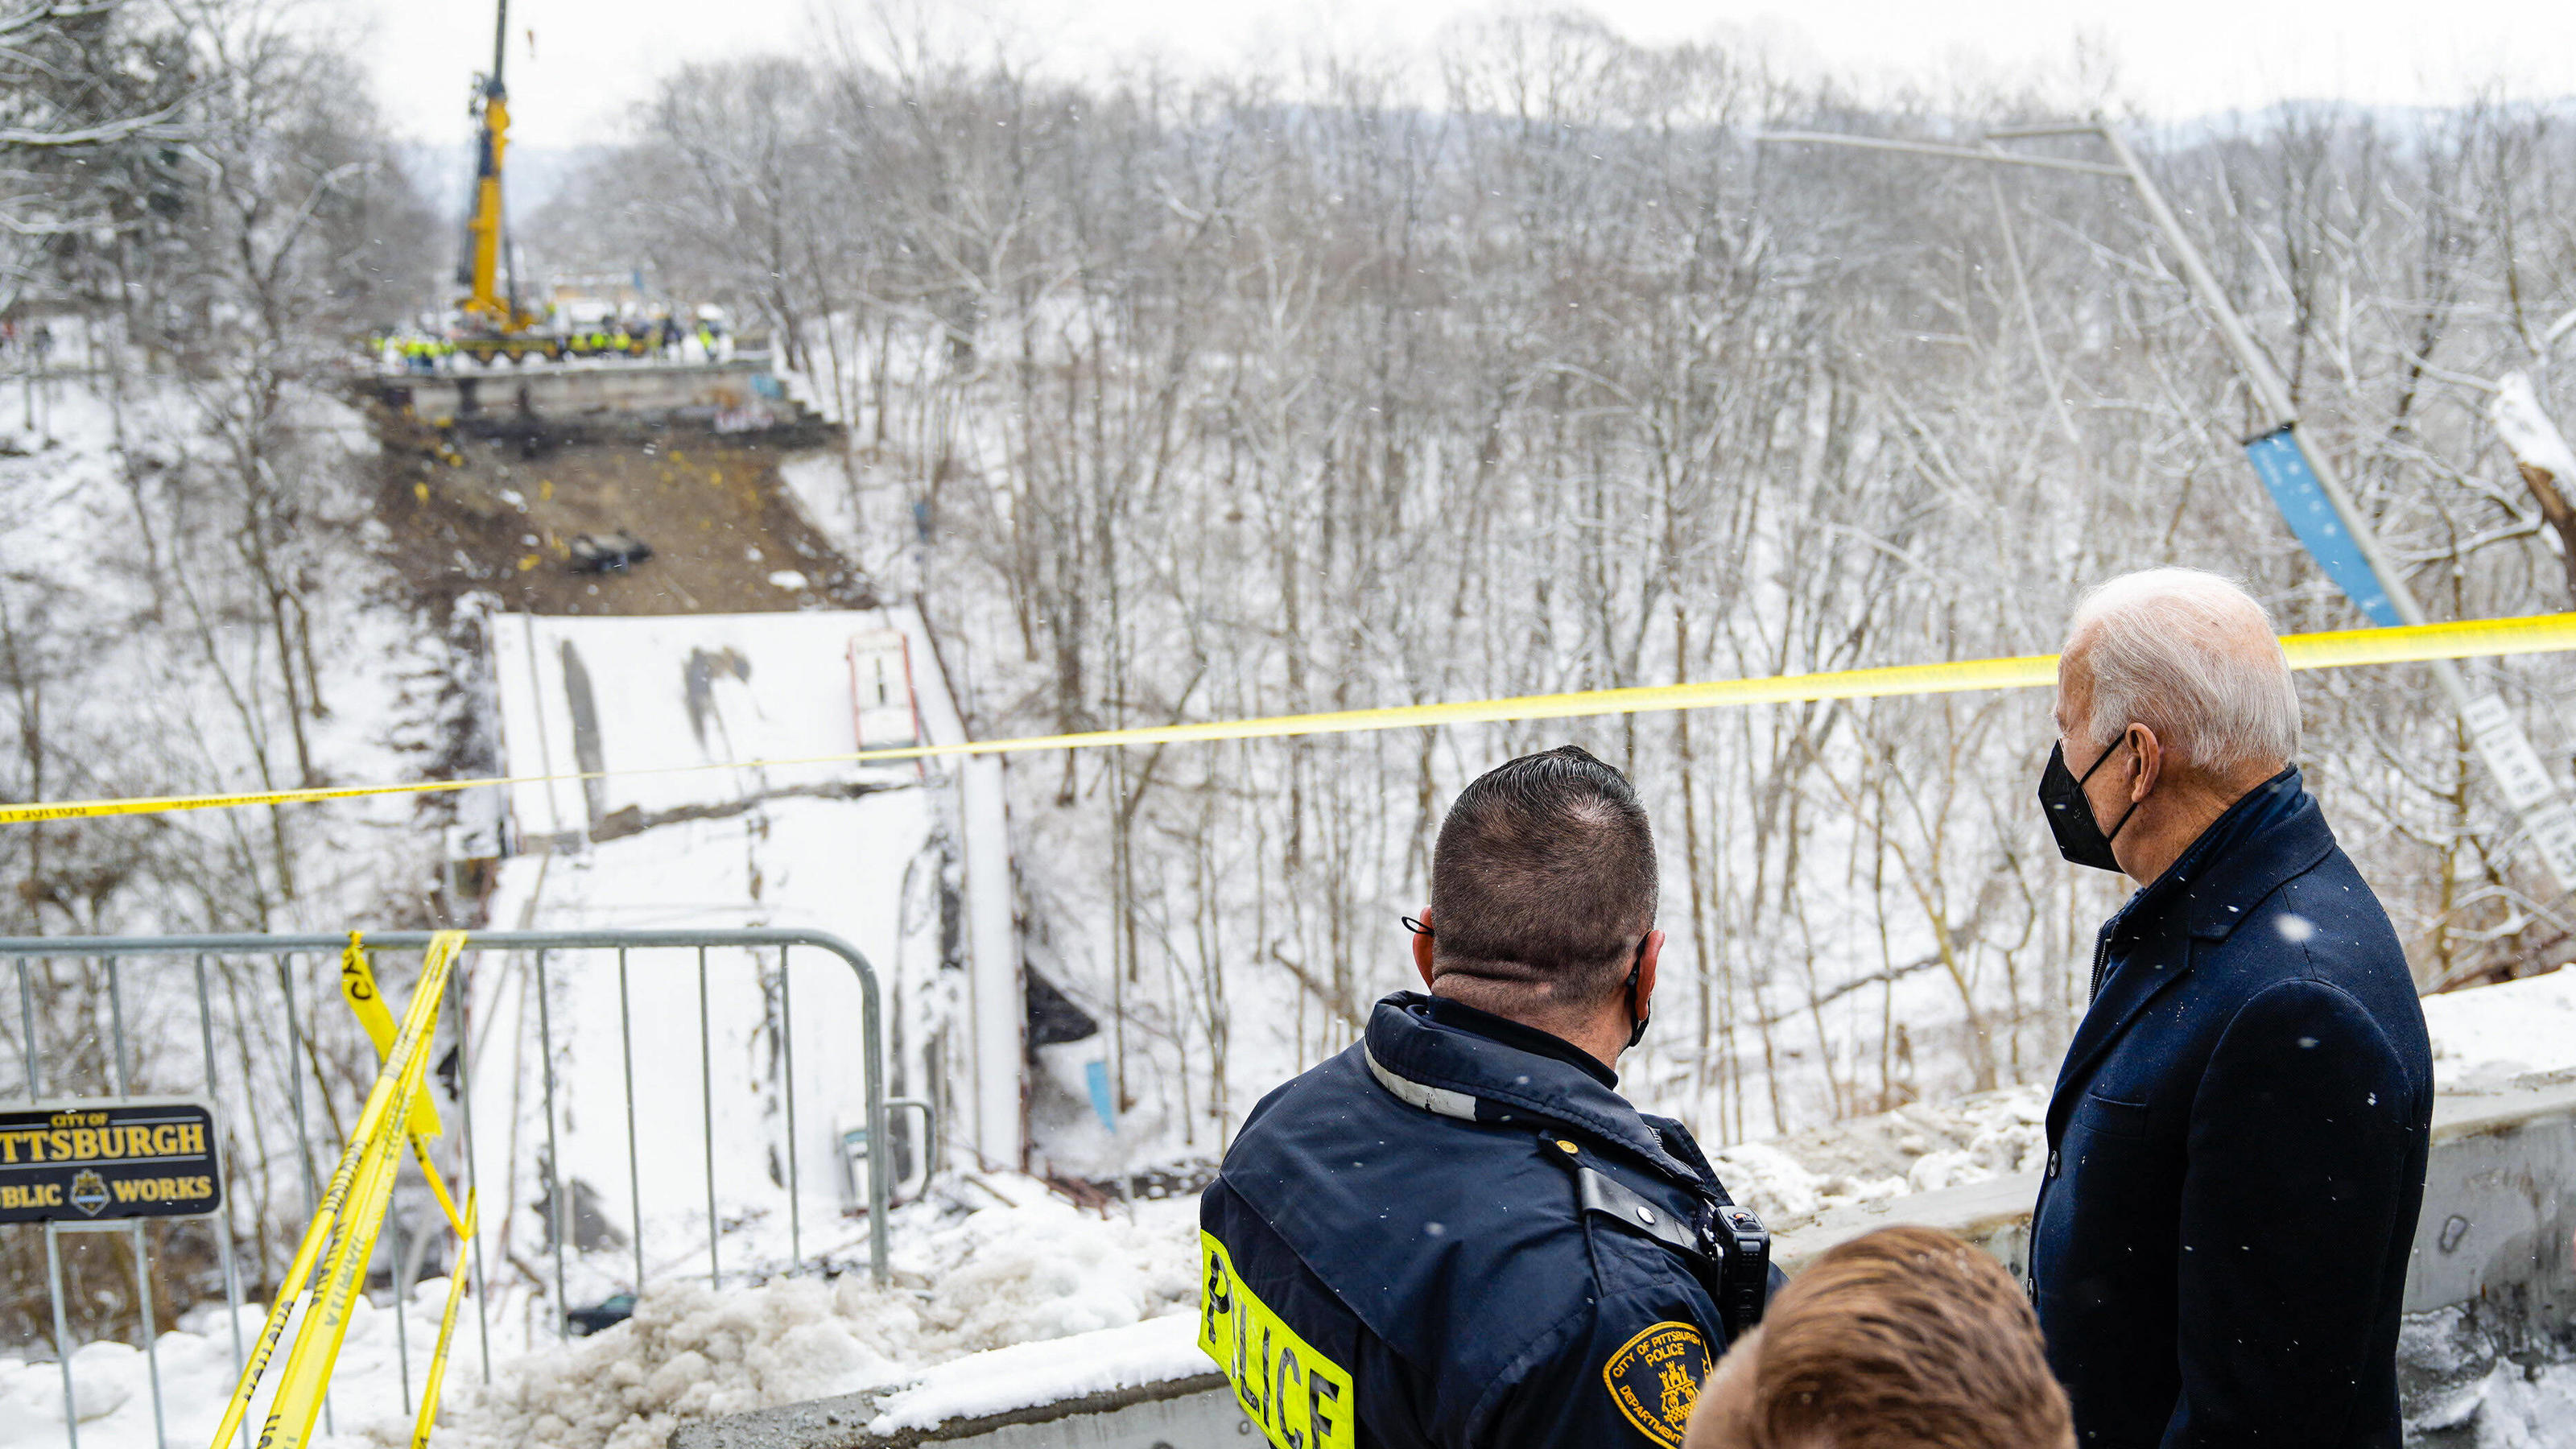  January 28, 2022, Pittsburgh, Pennsylvania, USA: President JOE BIDEN speaks to reporters and first responders as he visits the site of the the Fern Hollow bridge collapse in Pittsburgh s East End. The bridge collapsed sending multiple vehicles and a bus into a park below, ten people were injured. Biden was on a trip to Pittsburgh to tout the recently passed $1.2 trillion infrastructure bill. Pittsburgh USA - ZUMA 20220128_new_z03_040 Copyright: xWhitexHousex